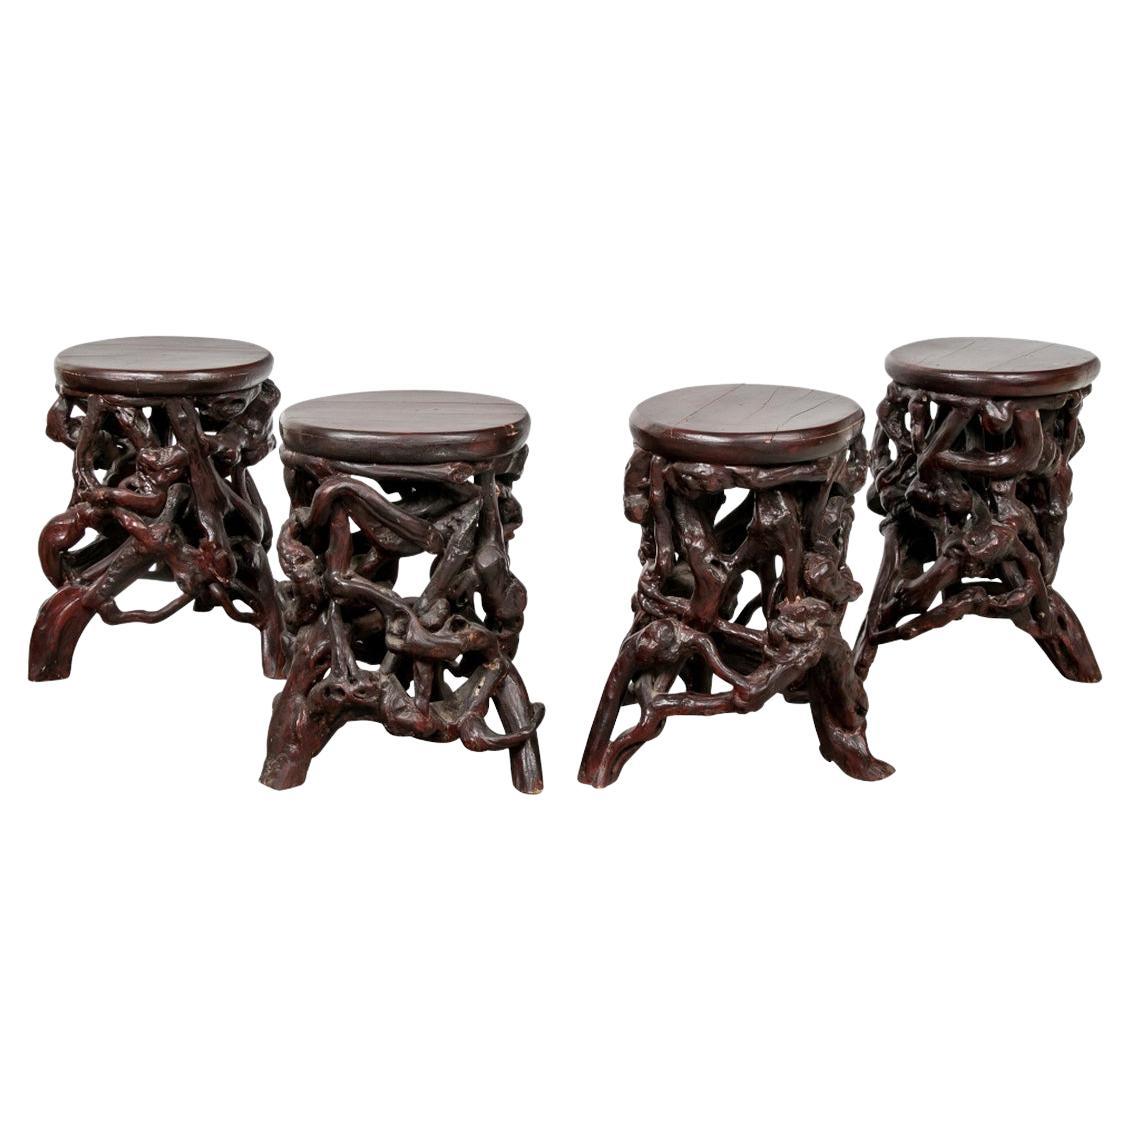 Set of Four Vintage Chinese Root Stools